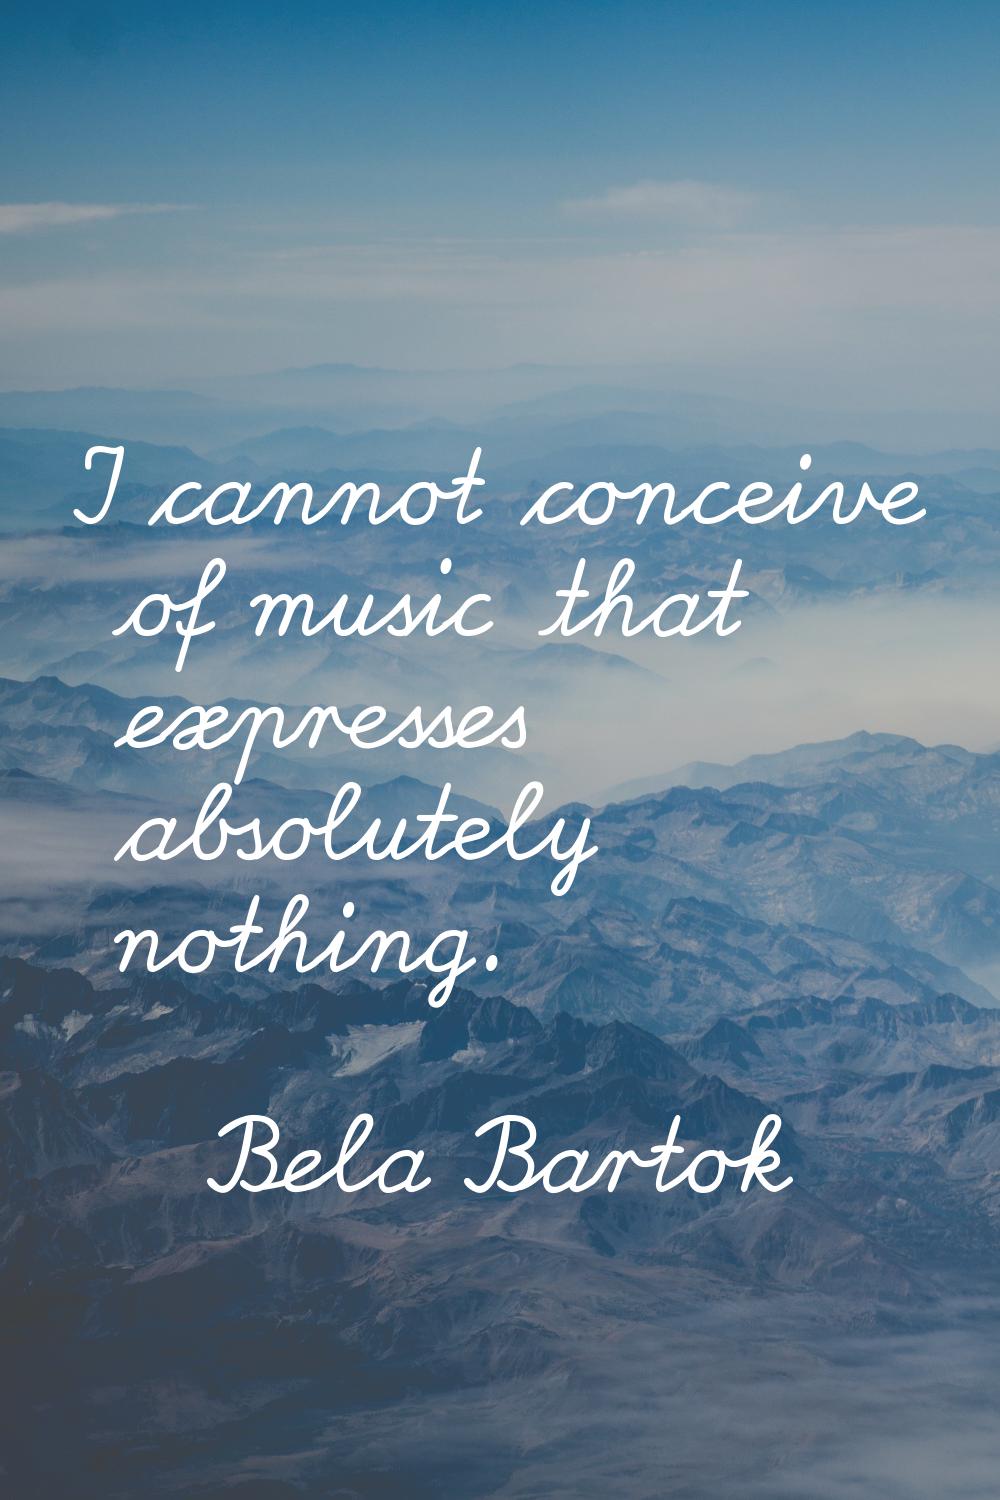 I cannot conceive of music that expresses absolutely nothing.